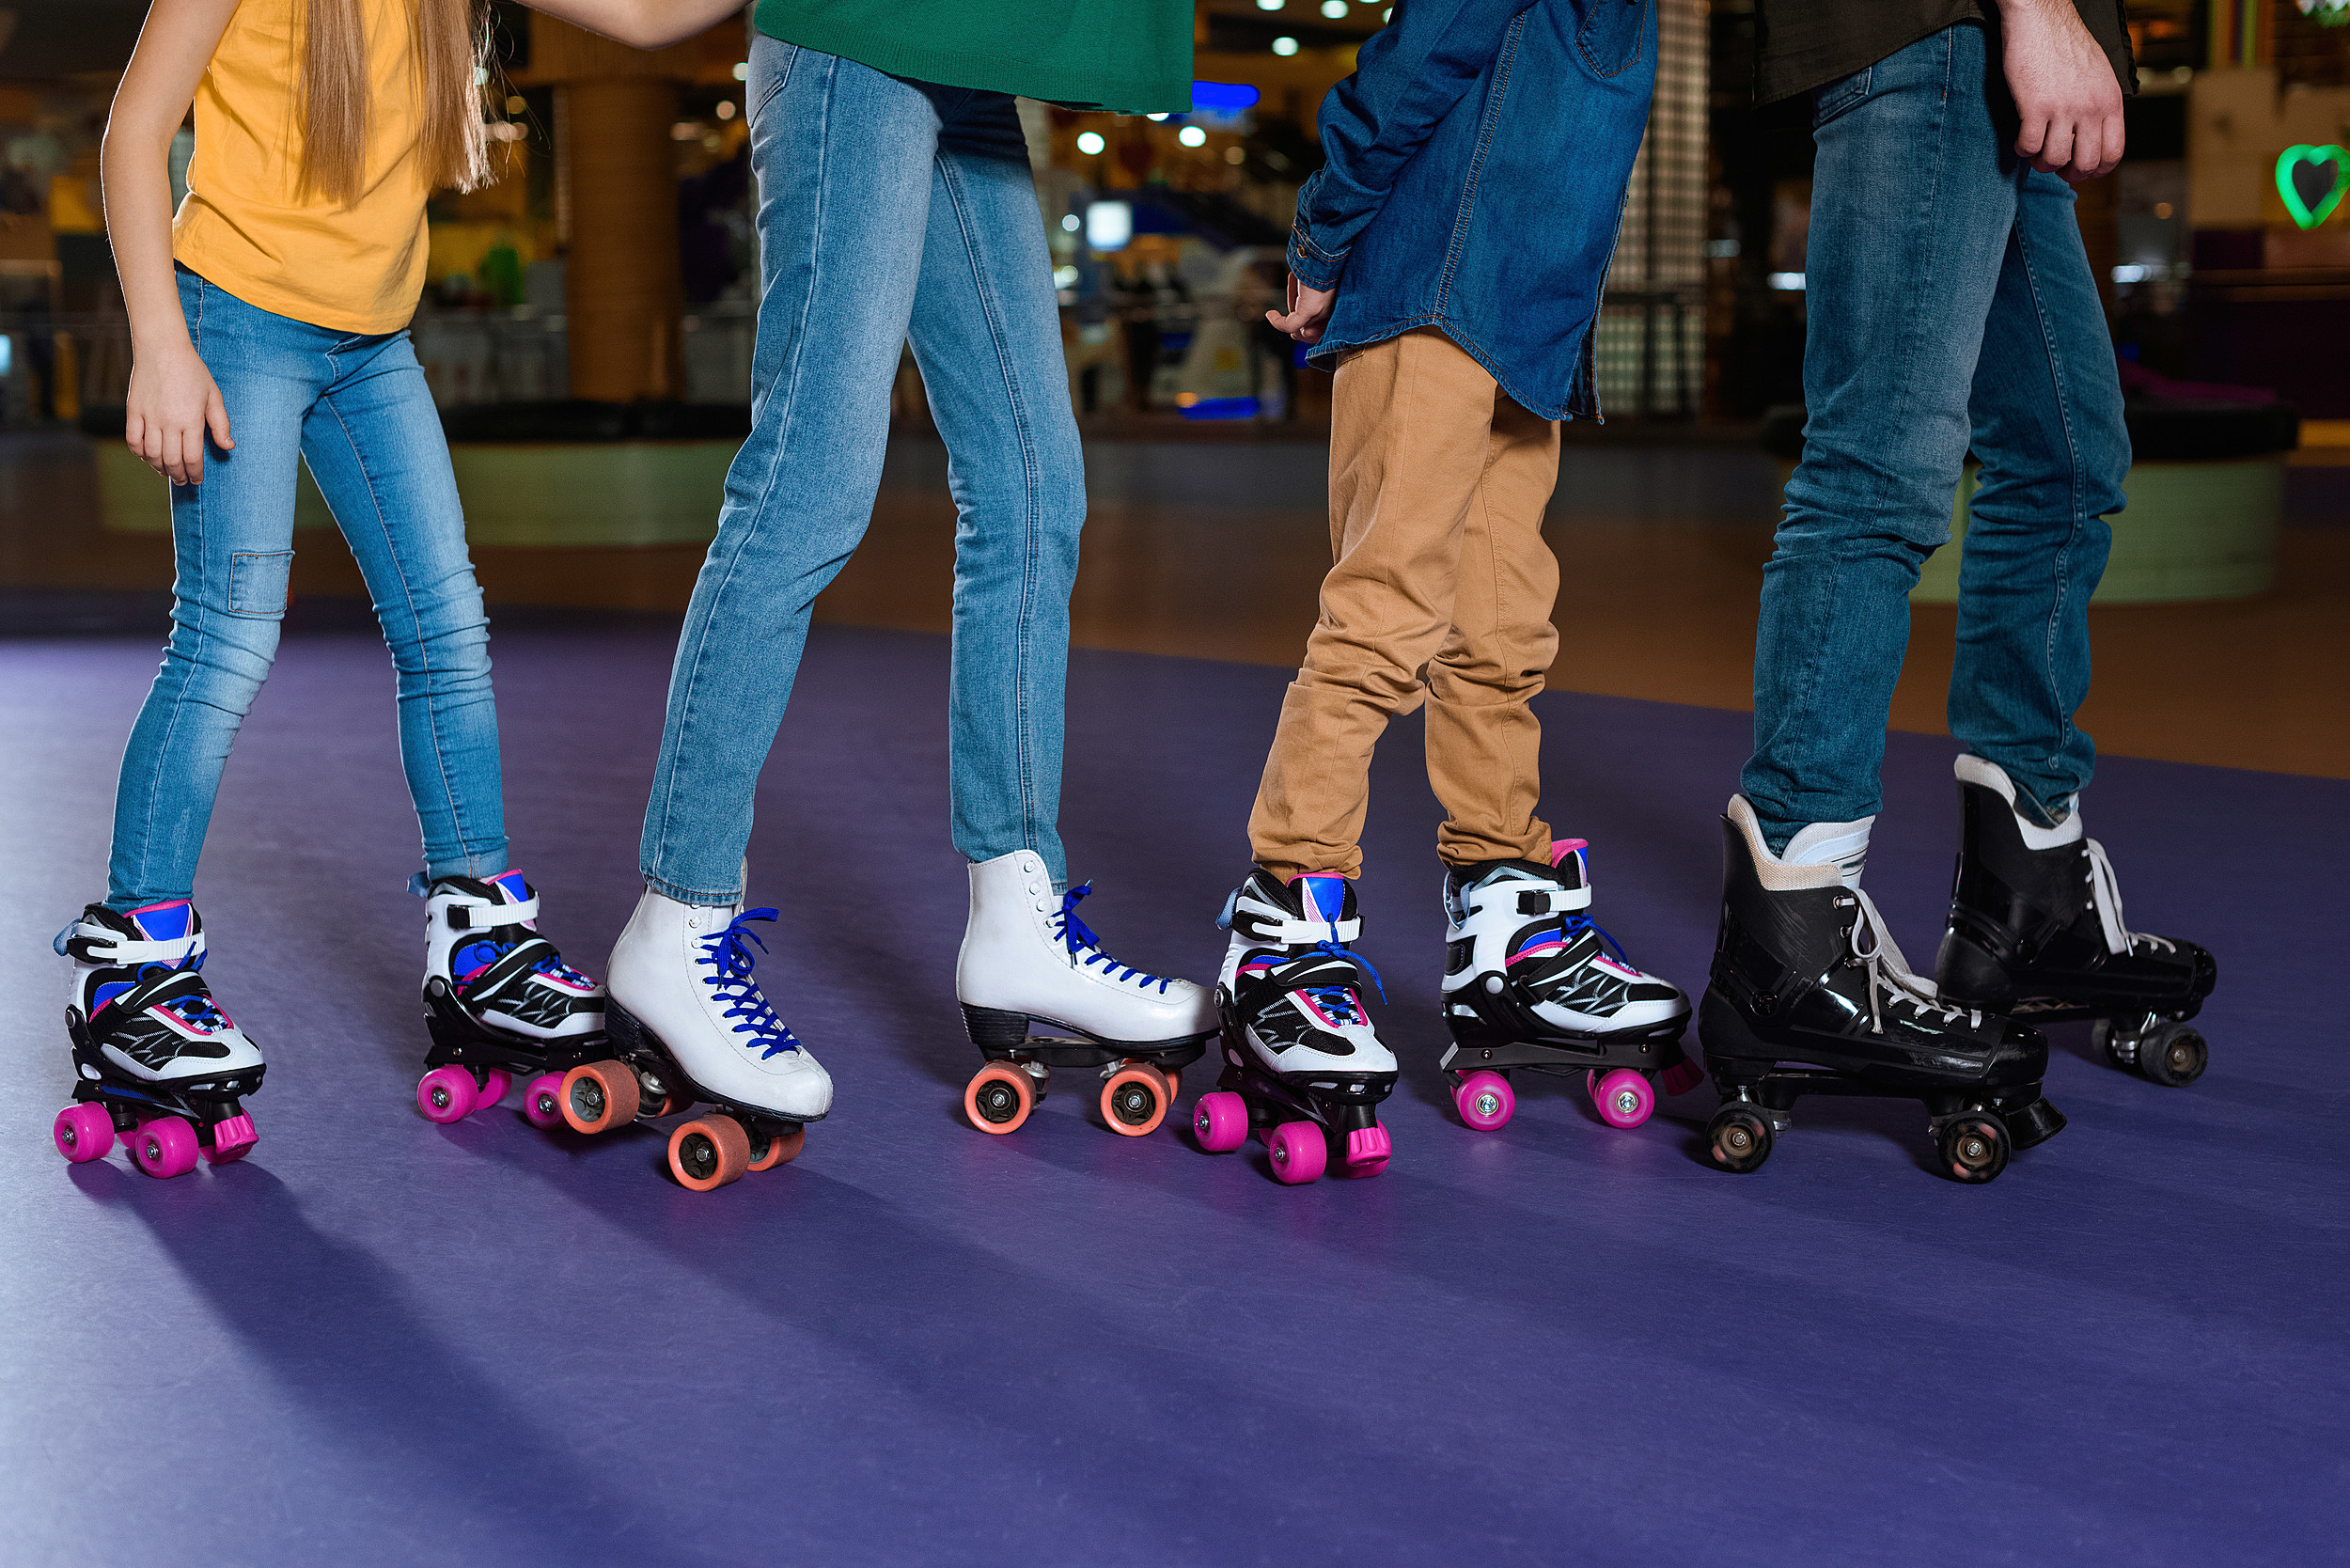 New York State's Largest Outdoor Roller Rink Coming To Buffalo